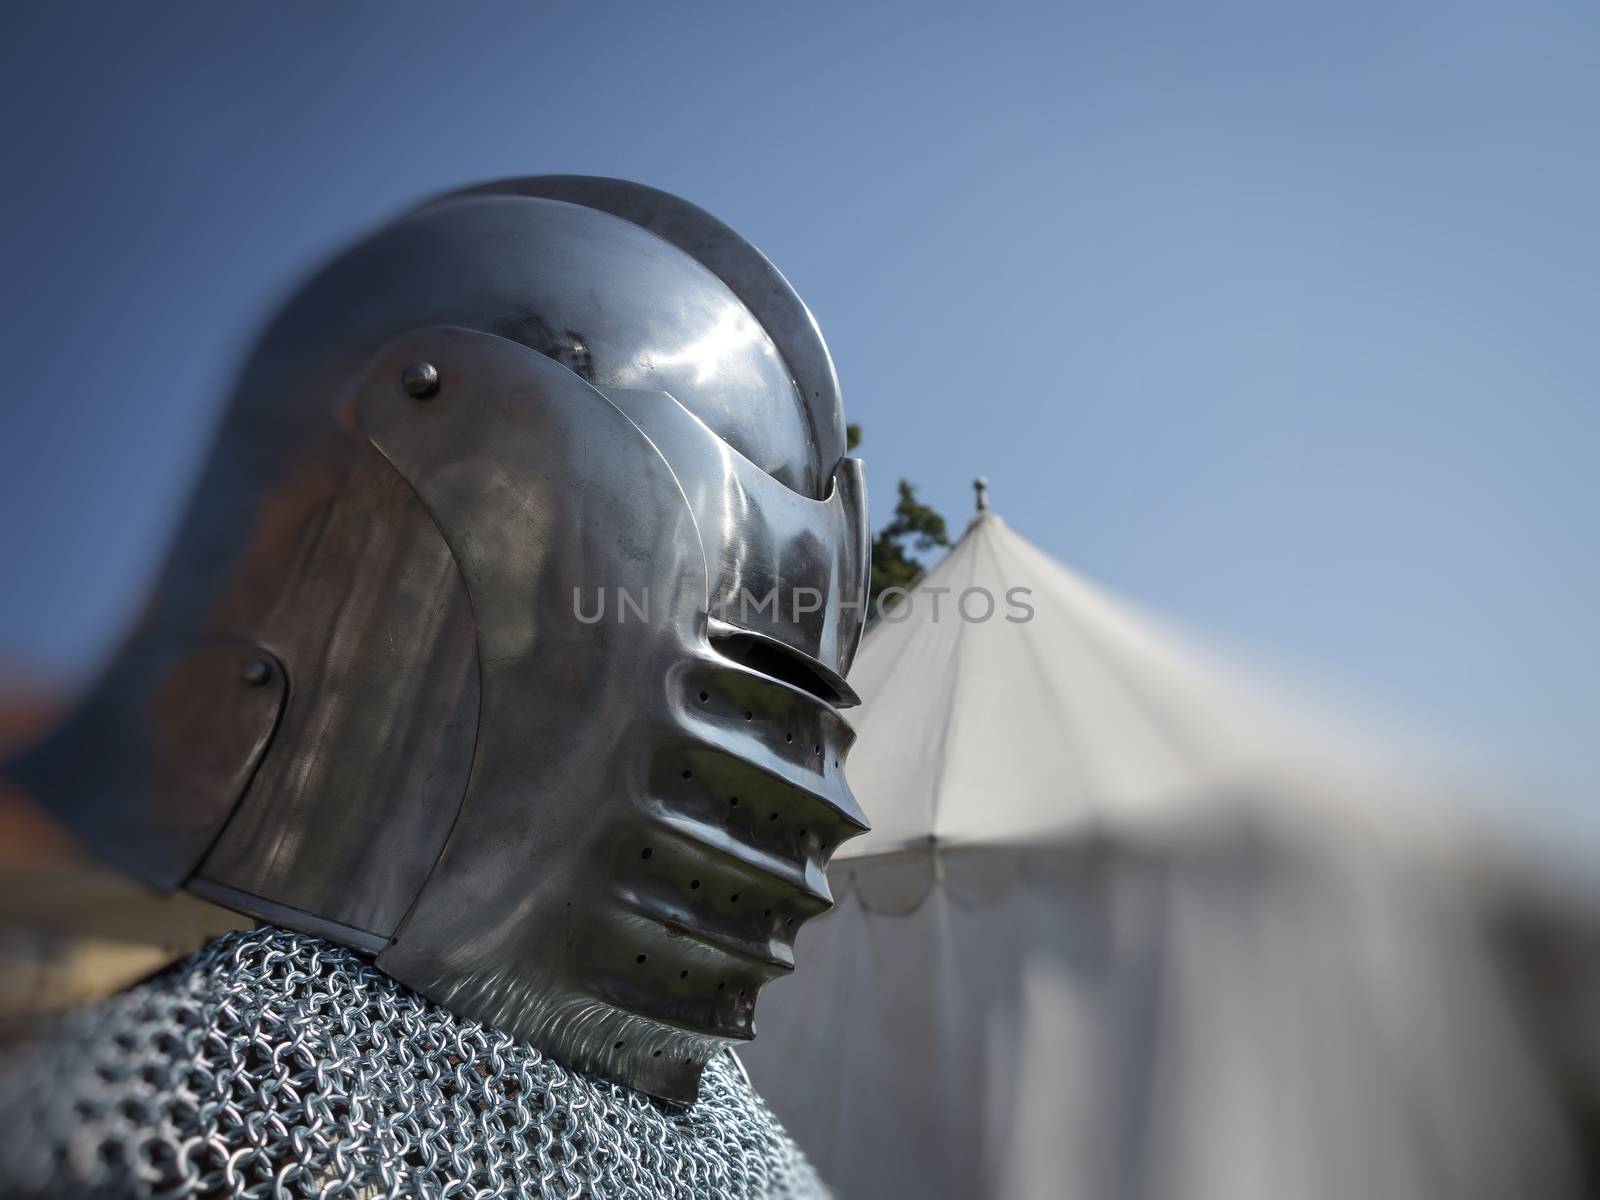 Knight in coat of mail and helmet in front of his tent ready for a fight.